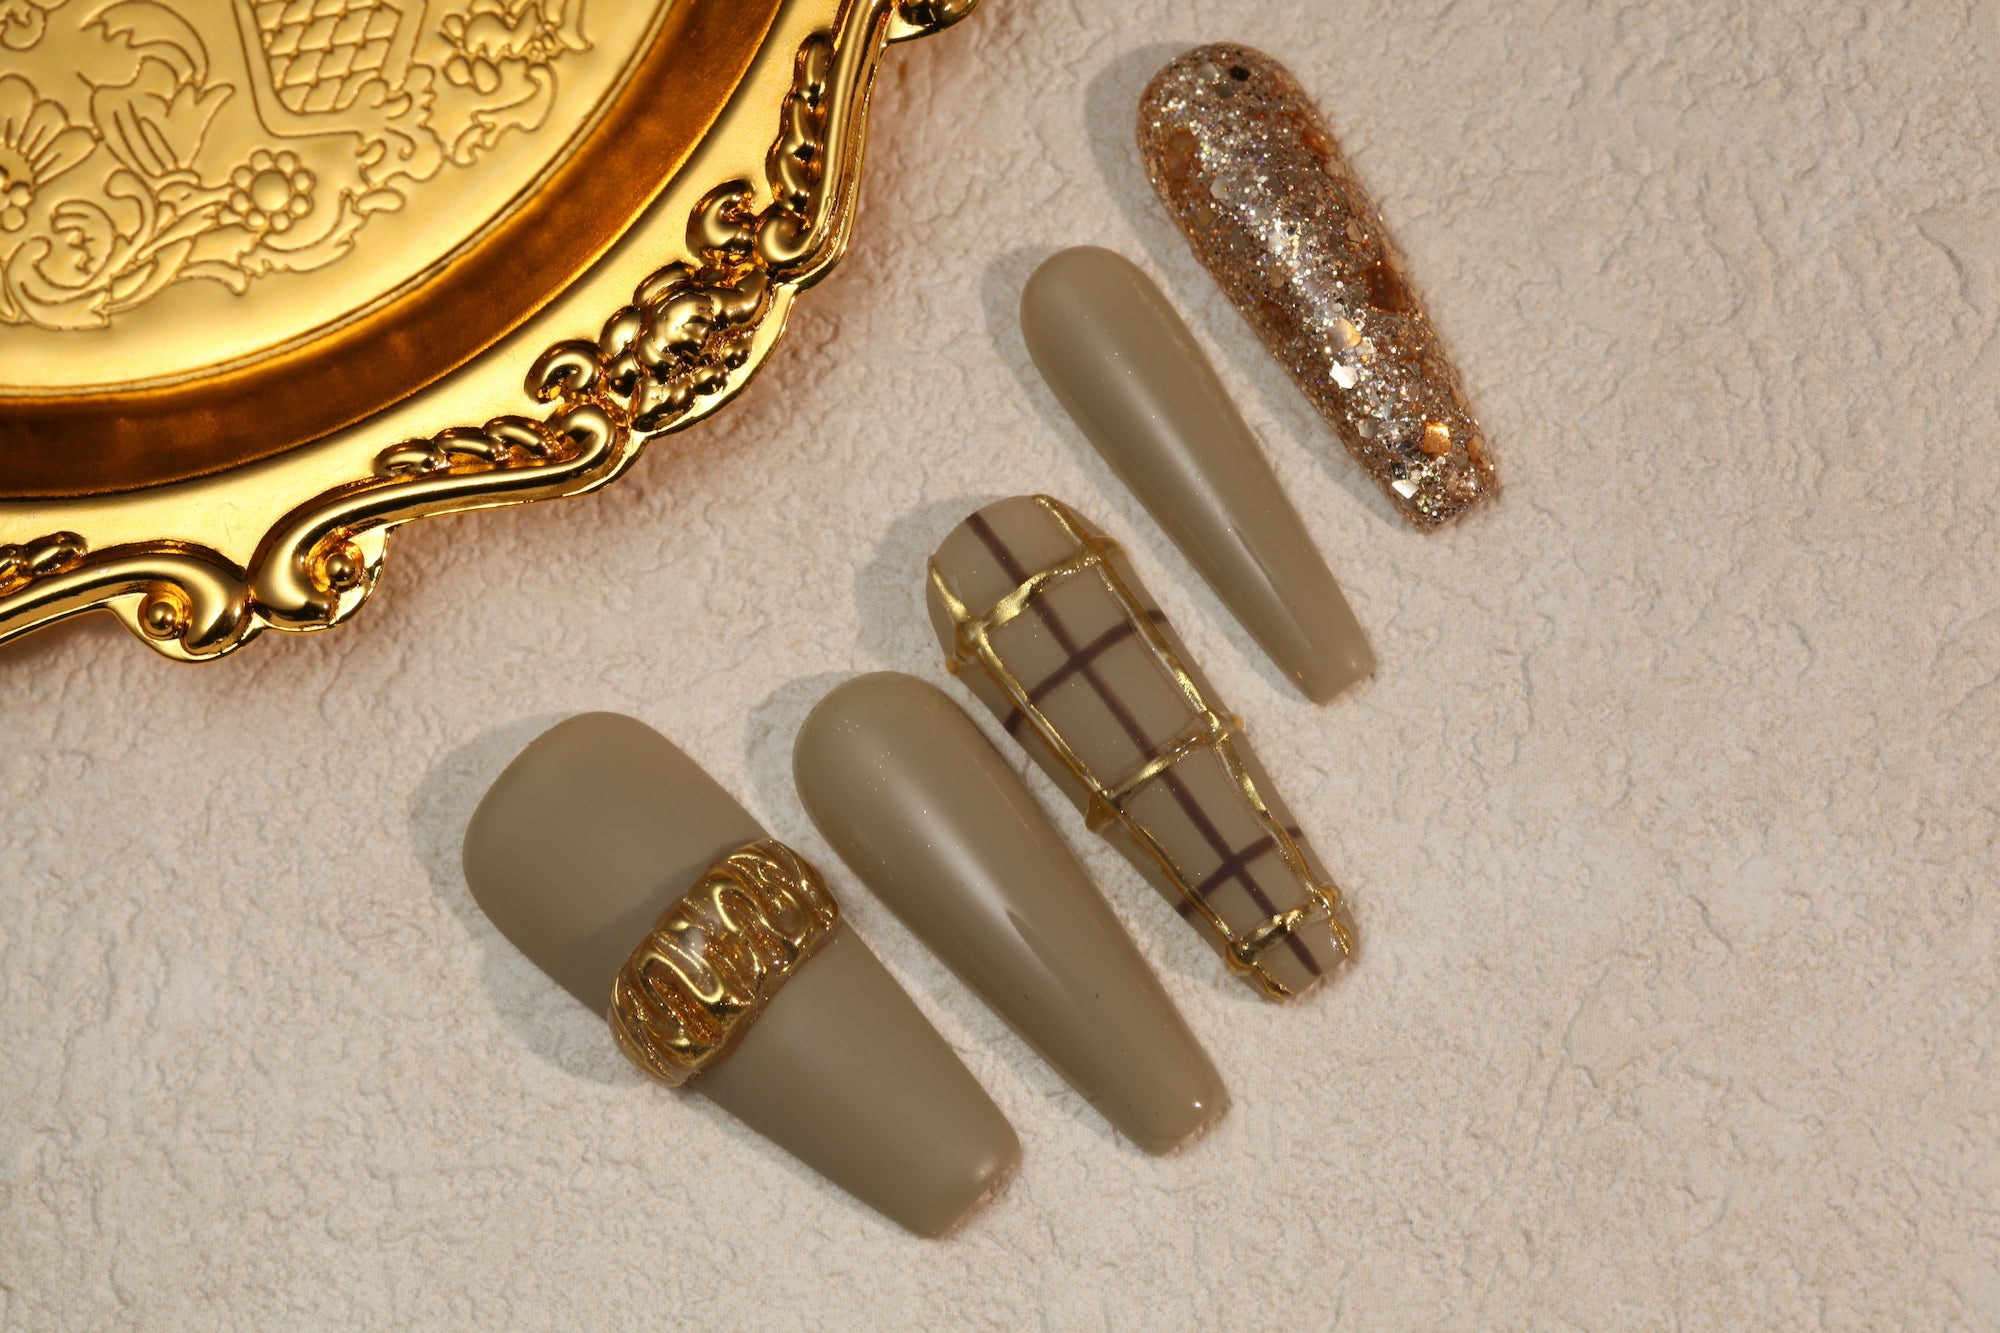 This Glitter Chrome Powder press on nail set features a specially curated base color in a unique gray-green shade, perfectly complemented by the dazzling gold glitter. The highlight of the design is the 3D ring-shaped design with gold chrome powder. #MIEAP #MIEAPnails #pressonnail #falsenail #acrylicnail #nails #nailart #naildesign #nailinspo #handmadenail #summernail #autumnnail #nail2023 #graduationnail #glitternail #3Dnail